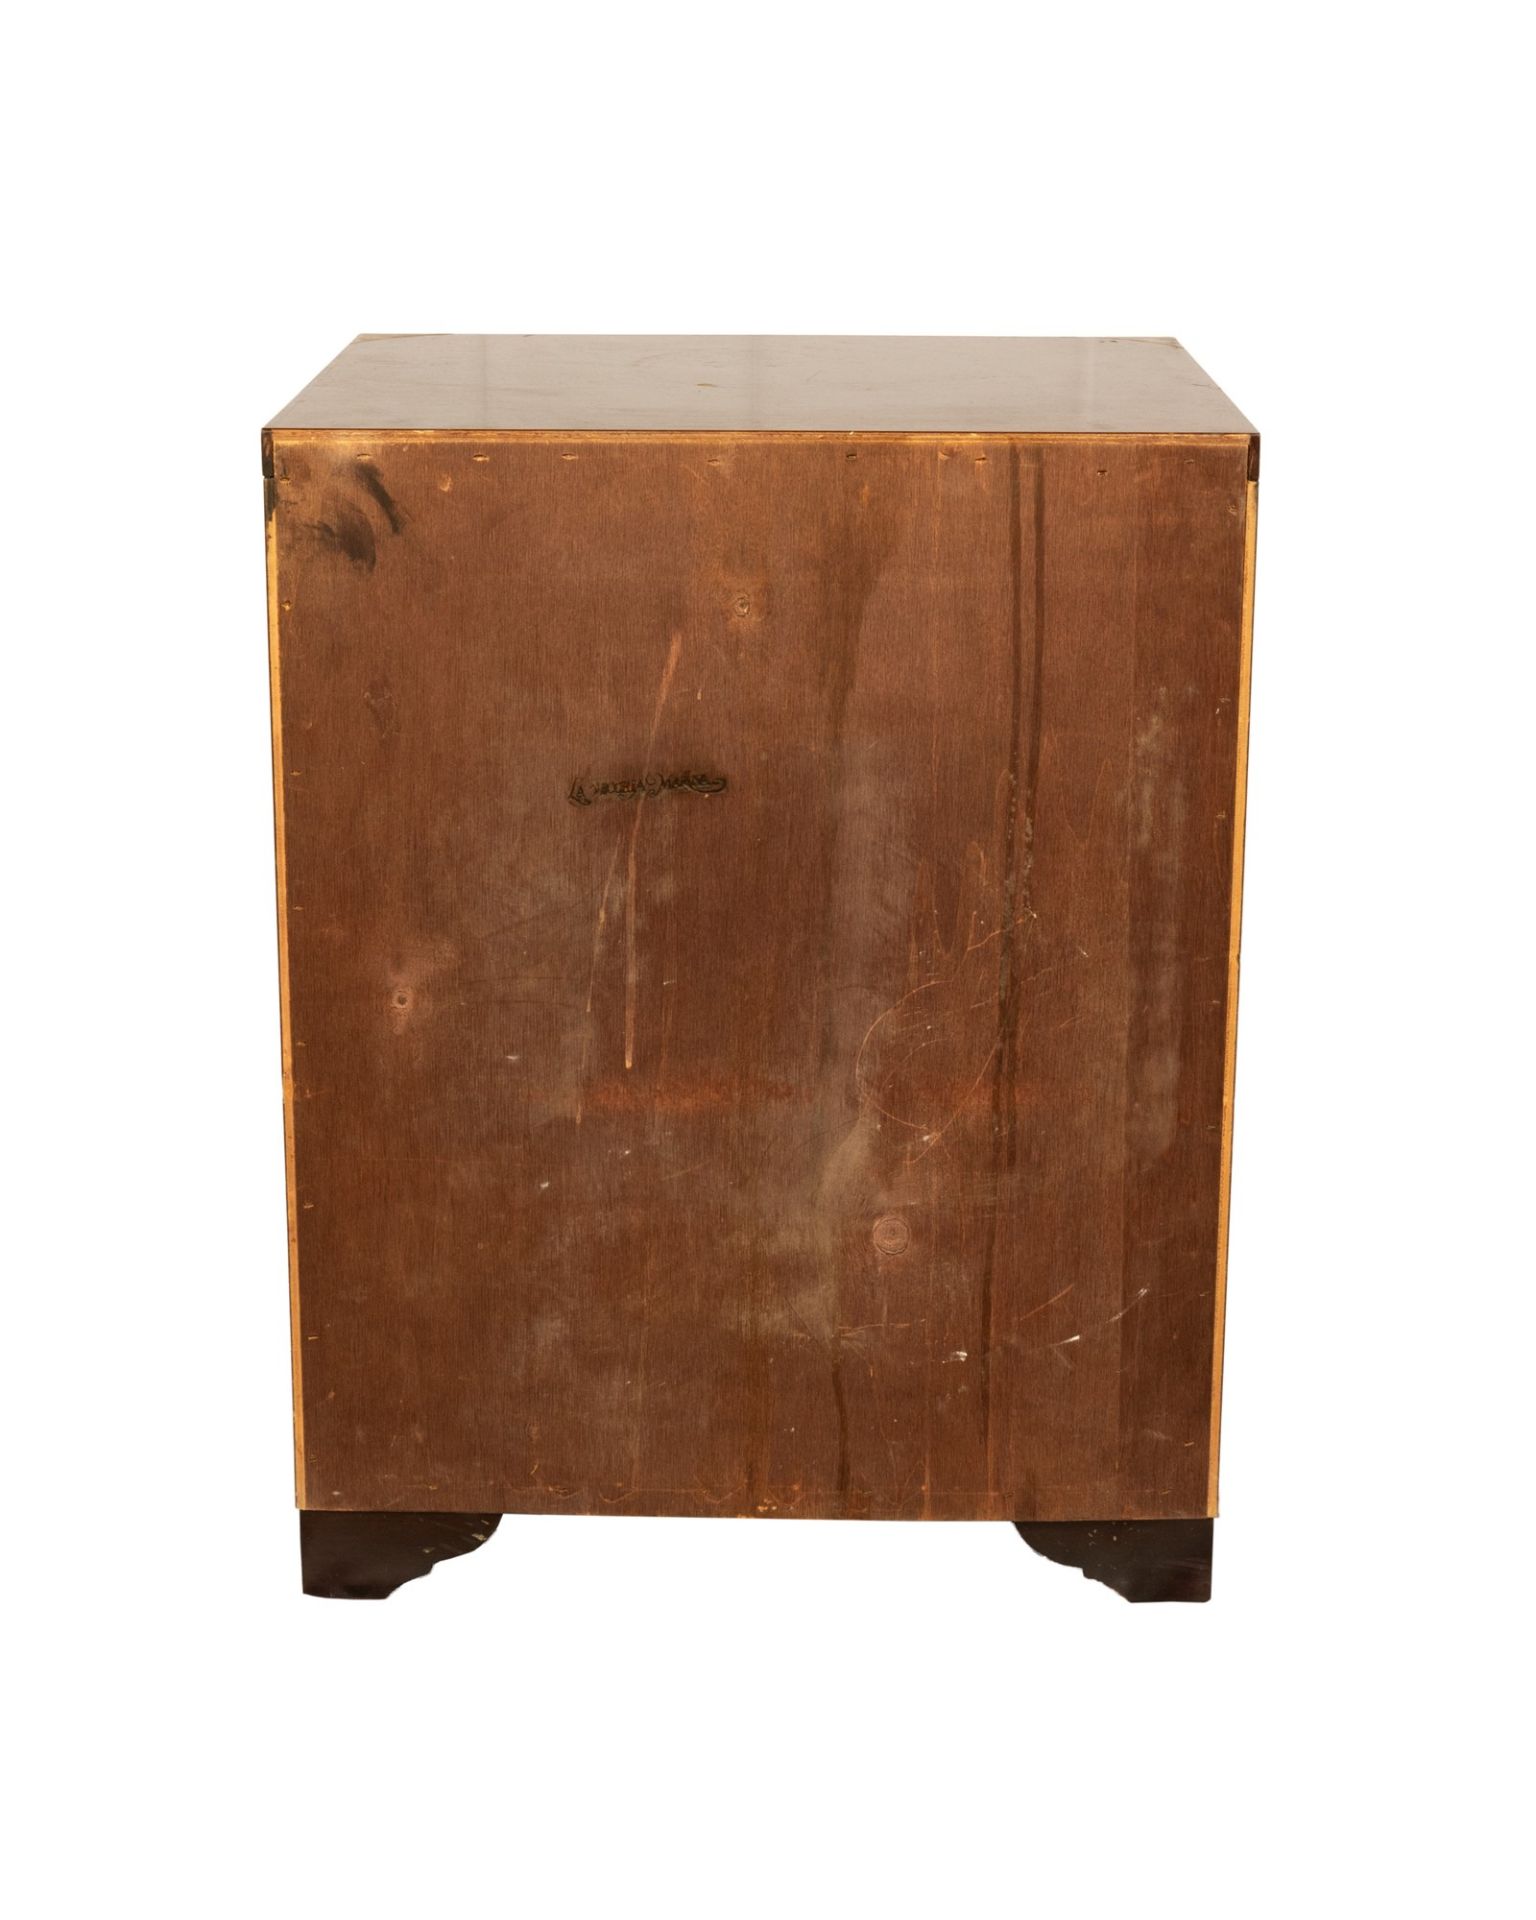 Antica Marina wooden bedside table with brass inserts - Image 21 of 23